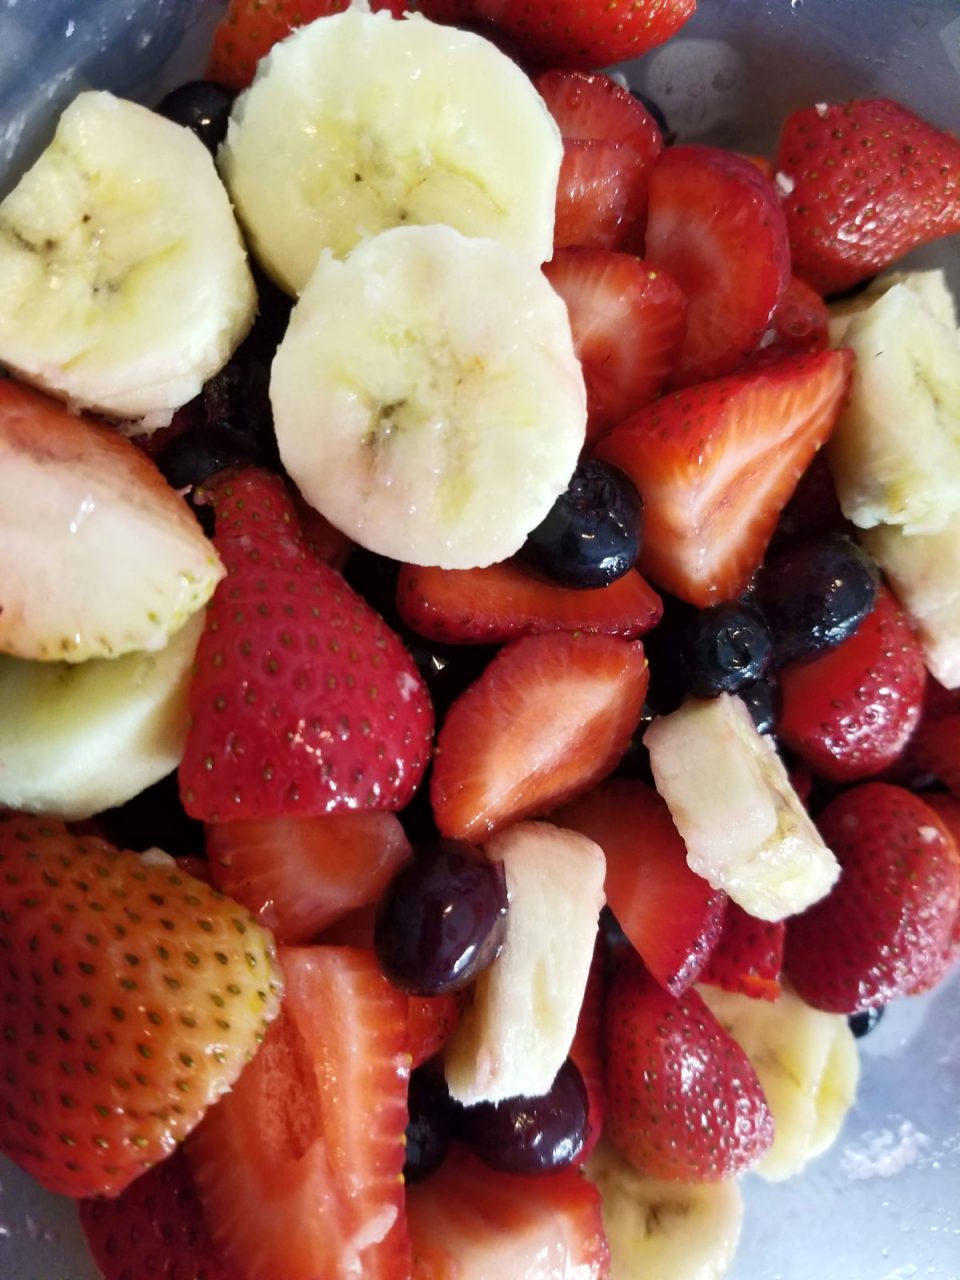 berry banana fruit salad with strawberries, blueberries and bananas